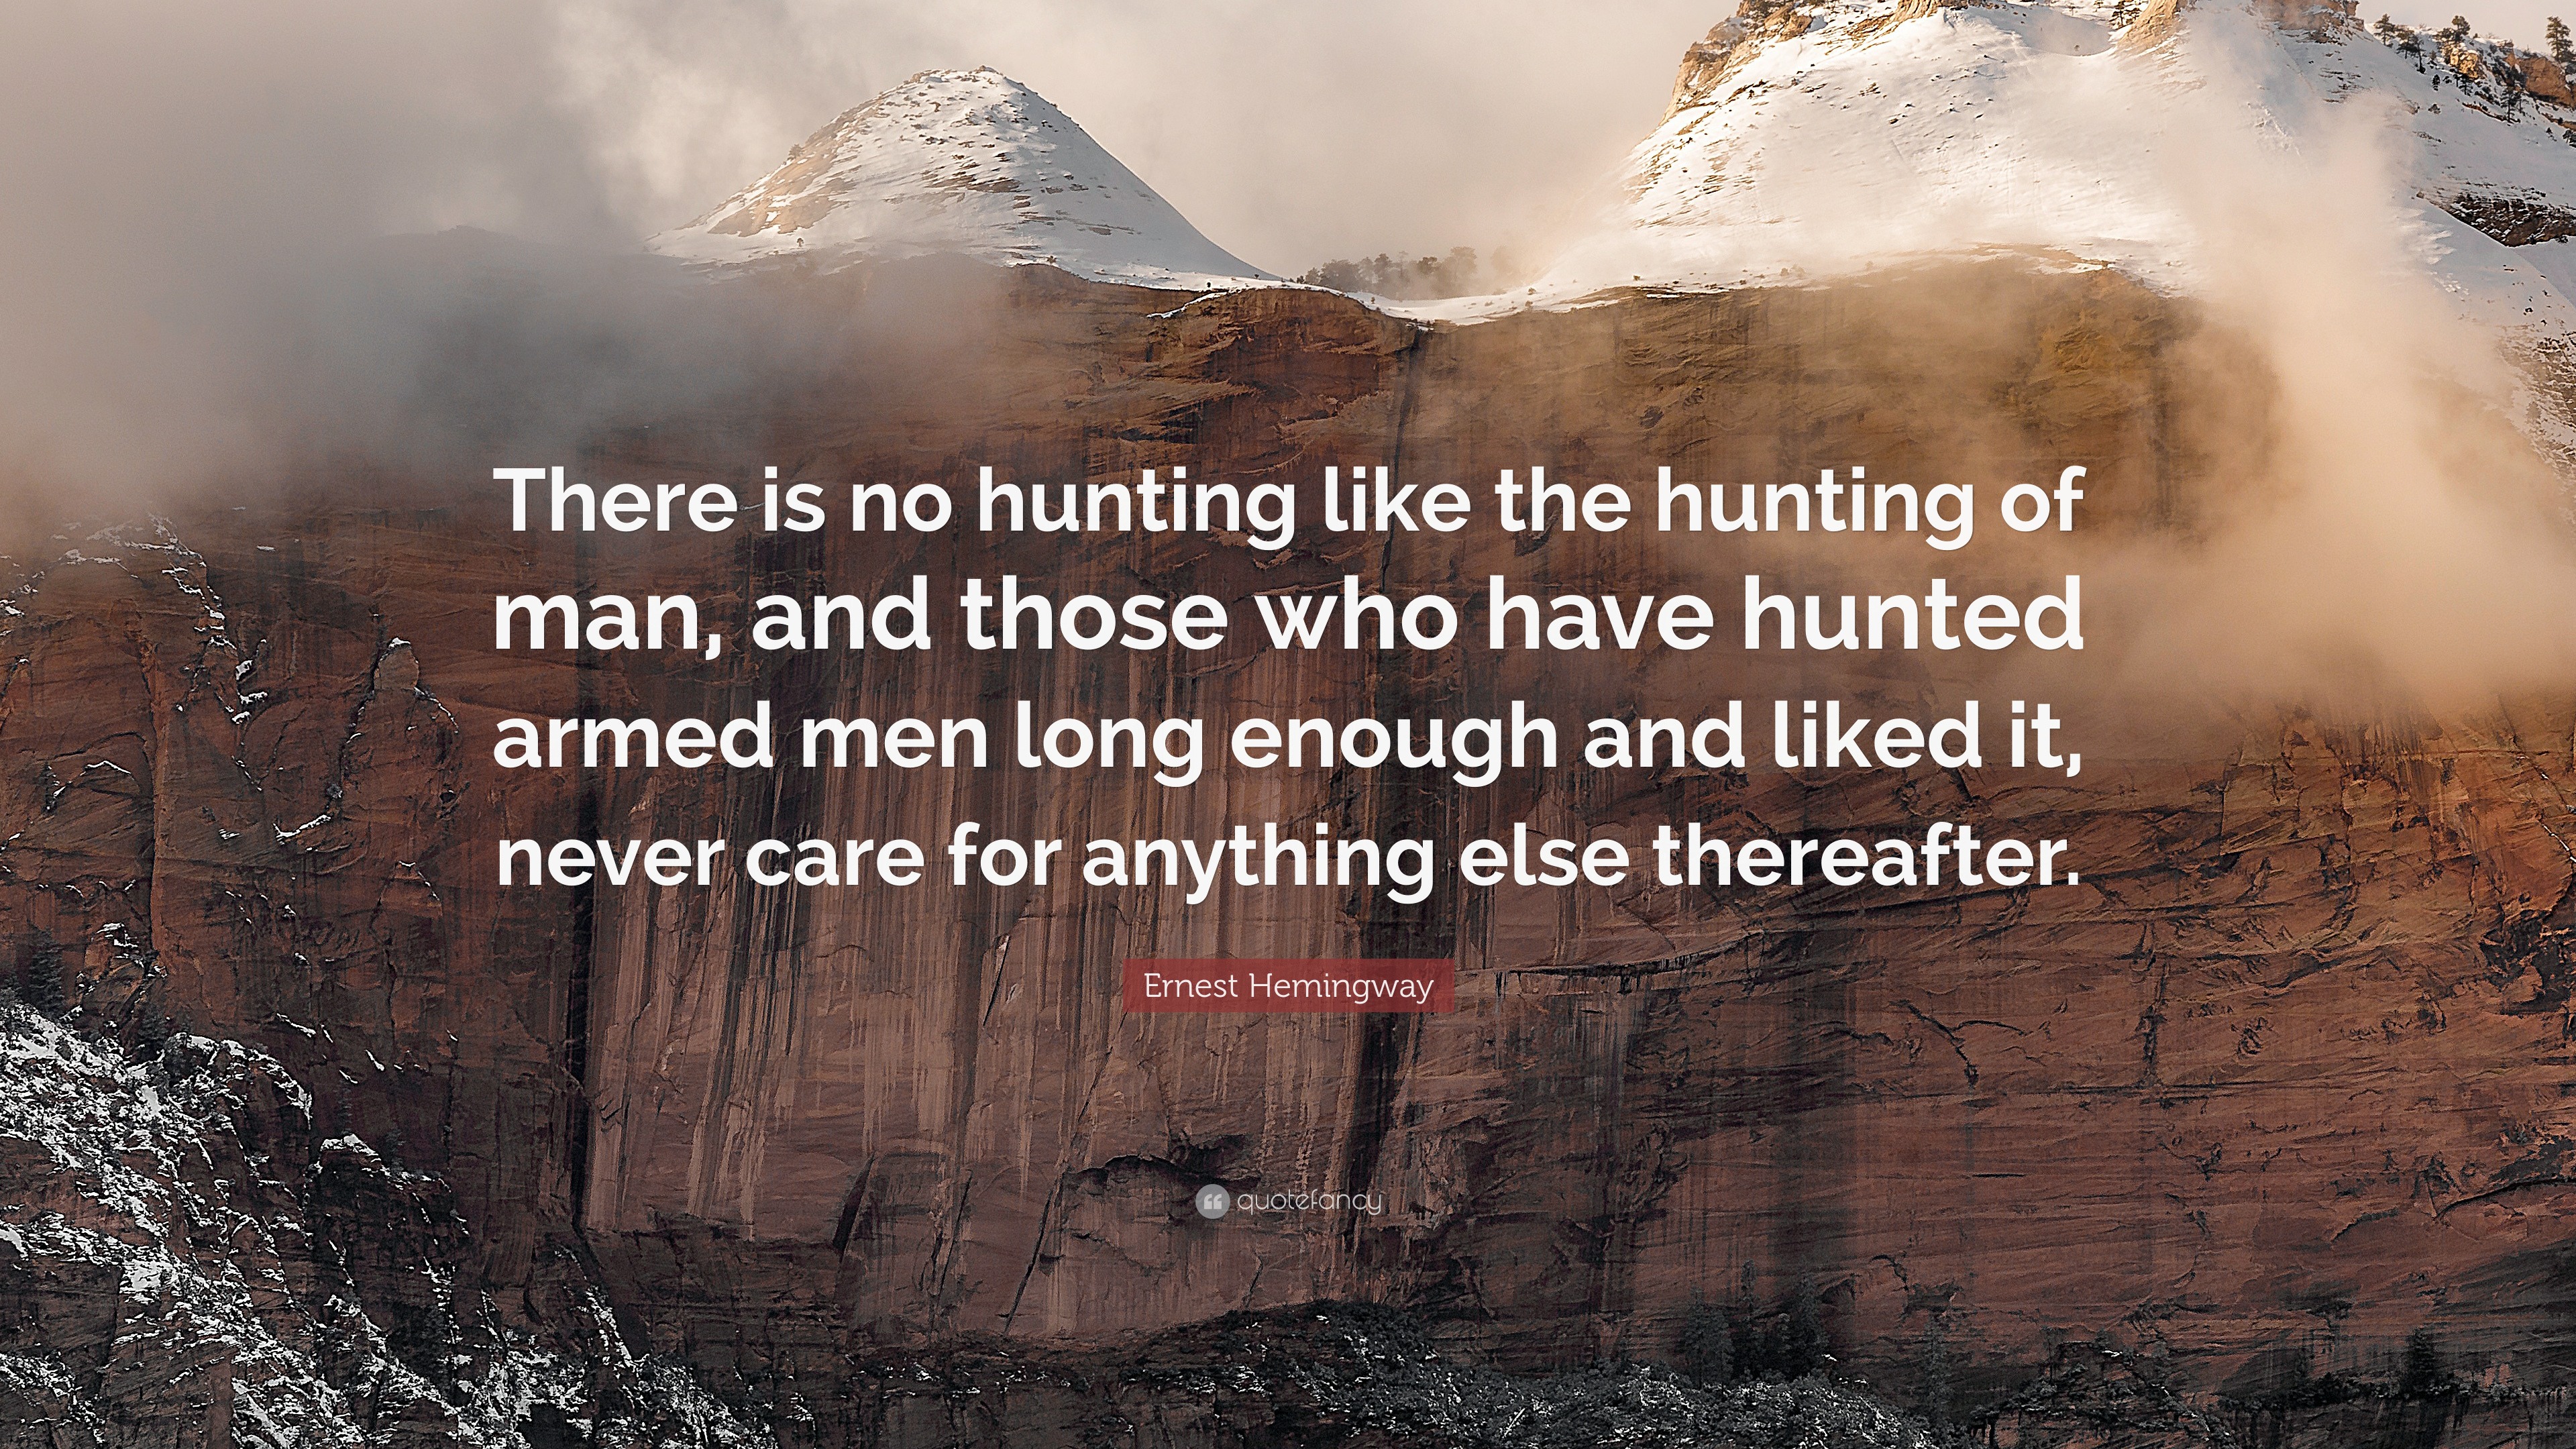 Ernest Hemingway Quote: “There is no hunting like the hunting of man